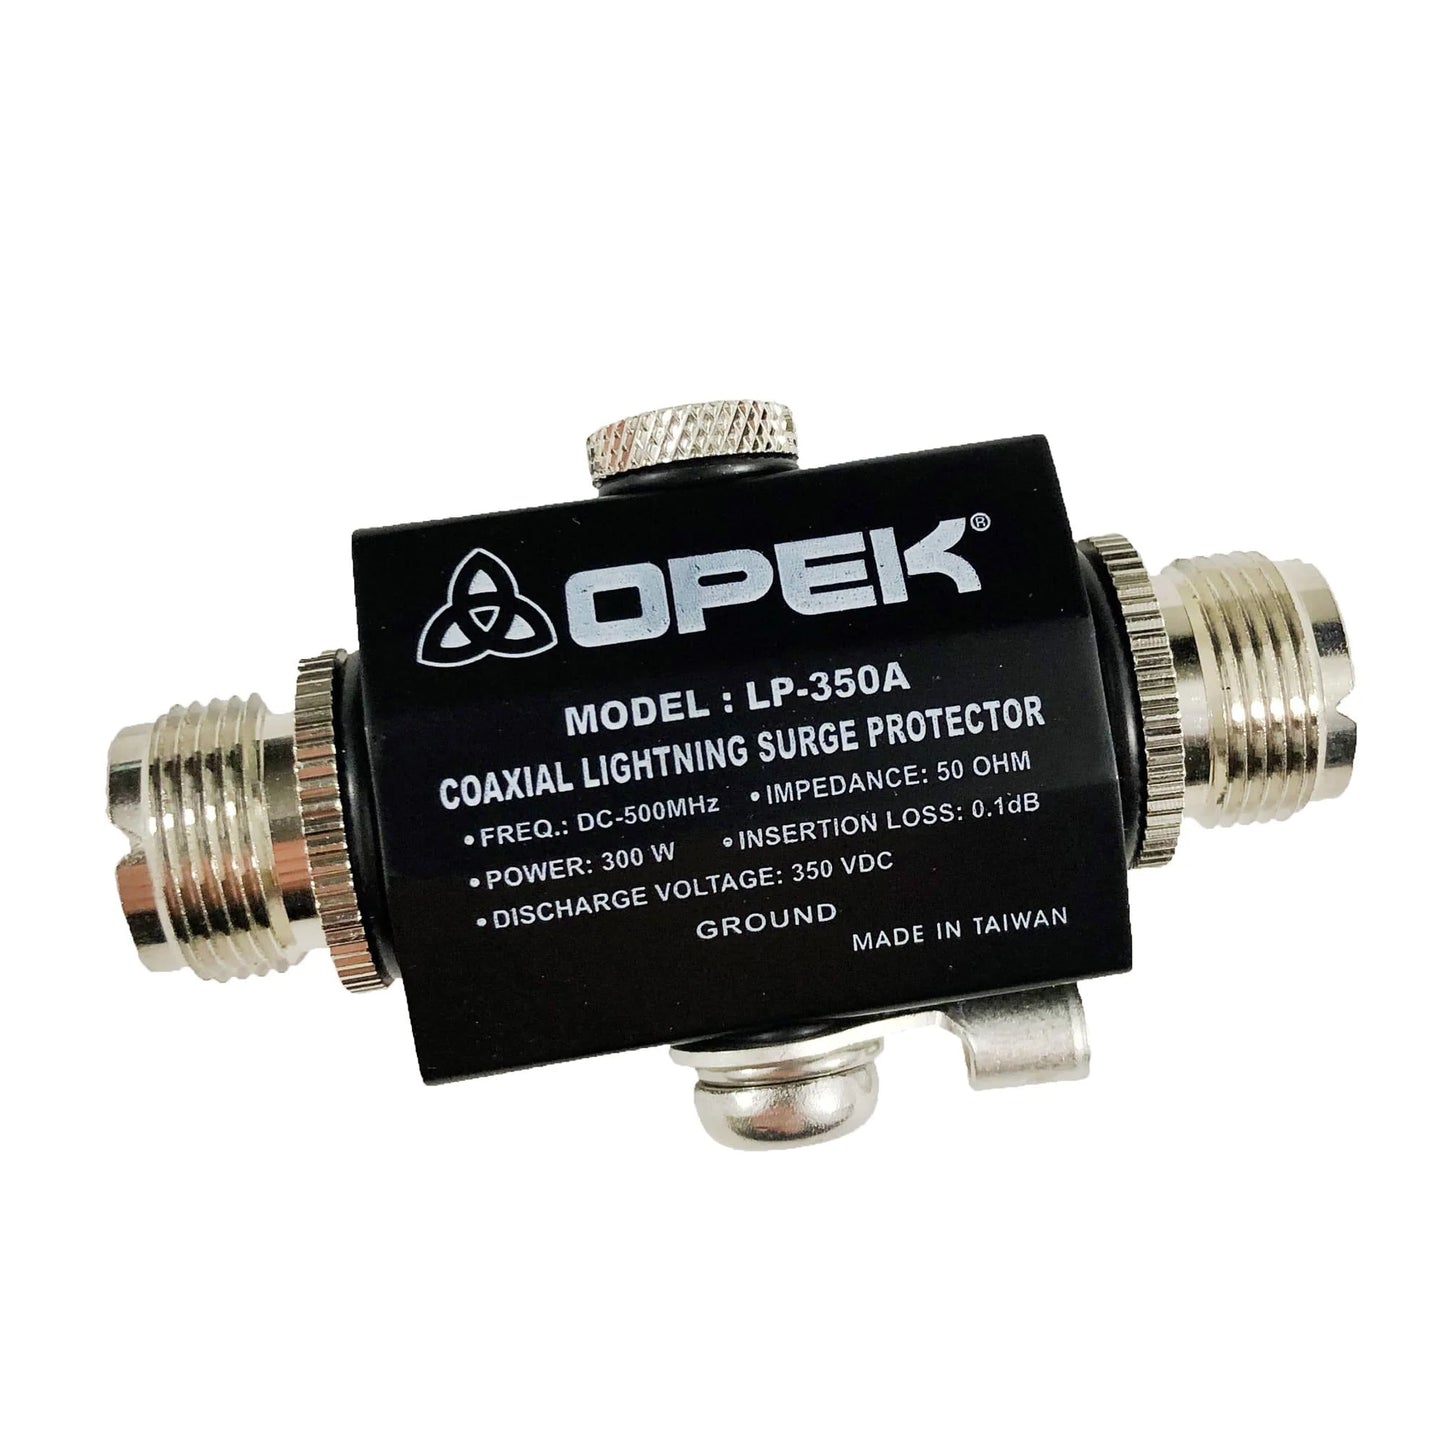 Opek LP-350A Coaxial Lightning Surge Protector